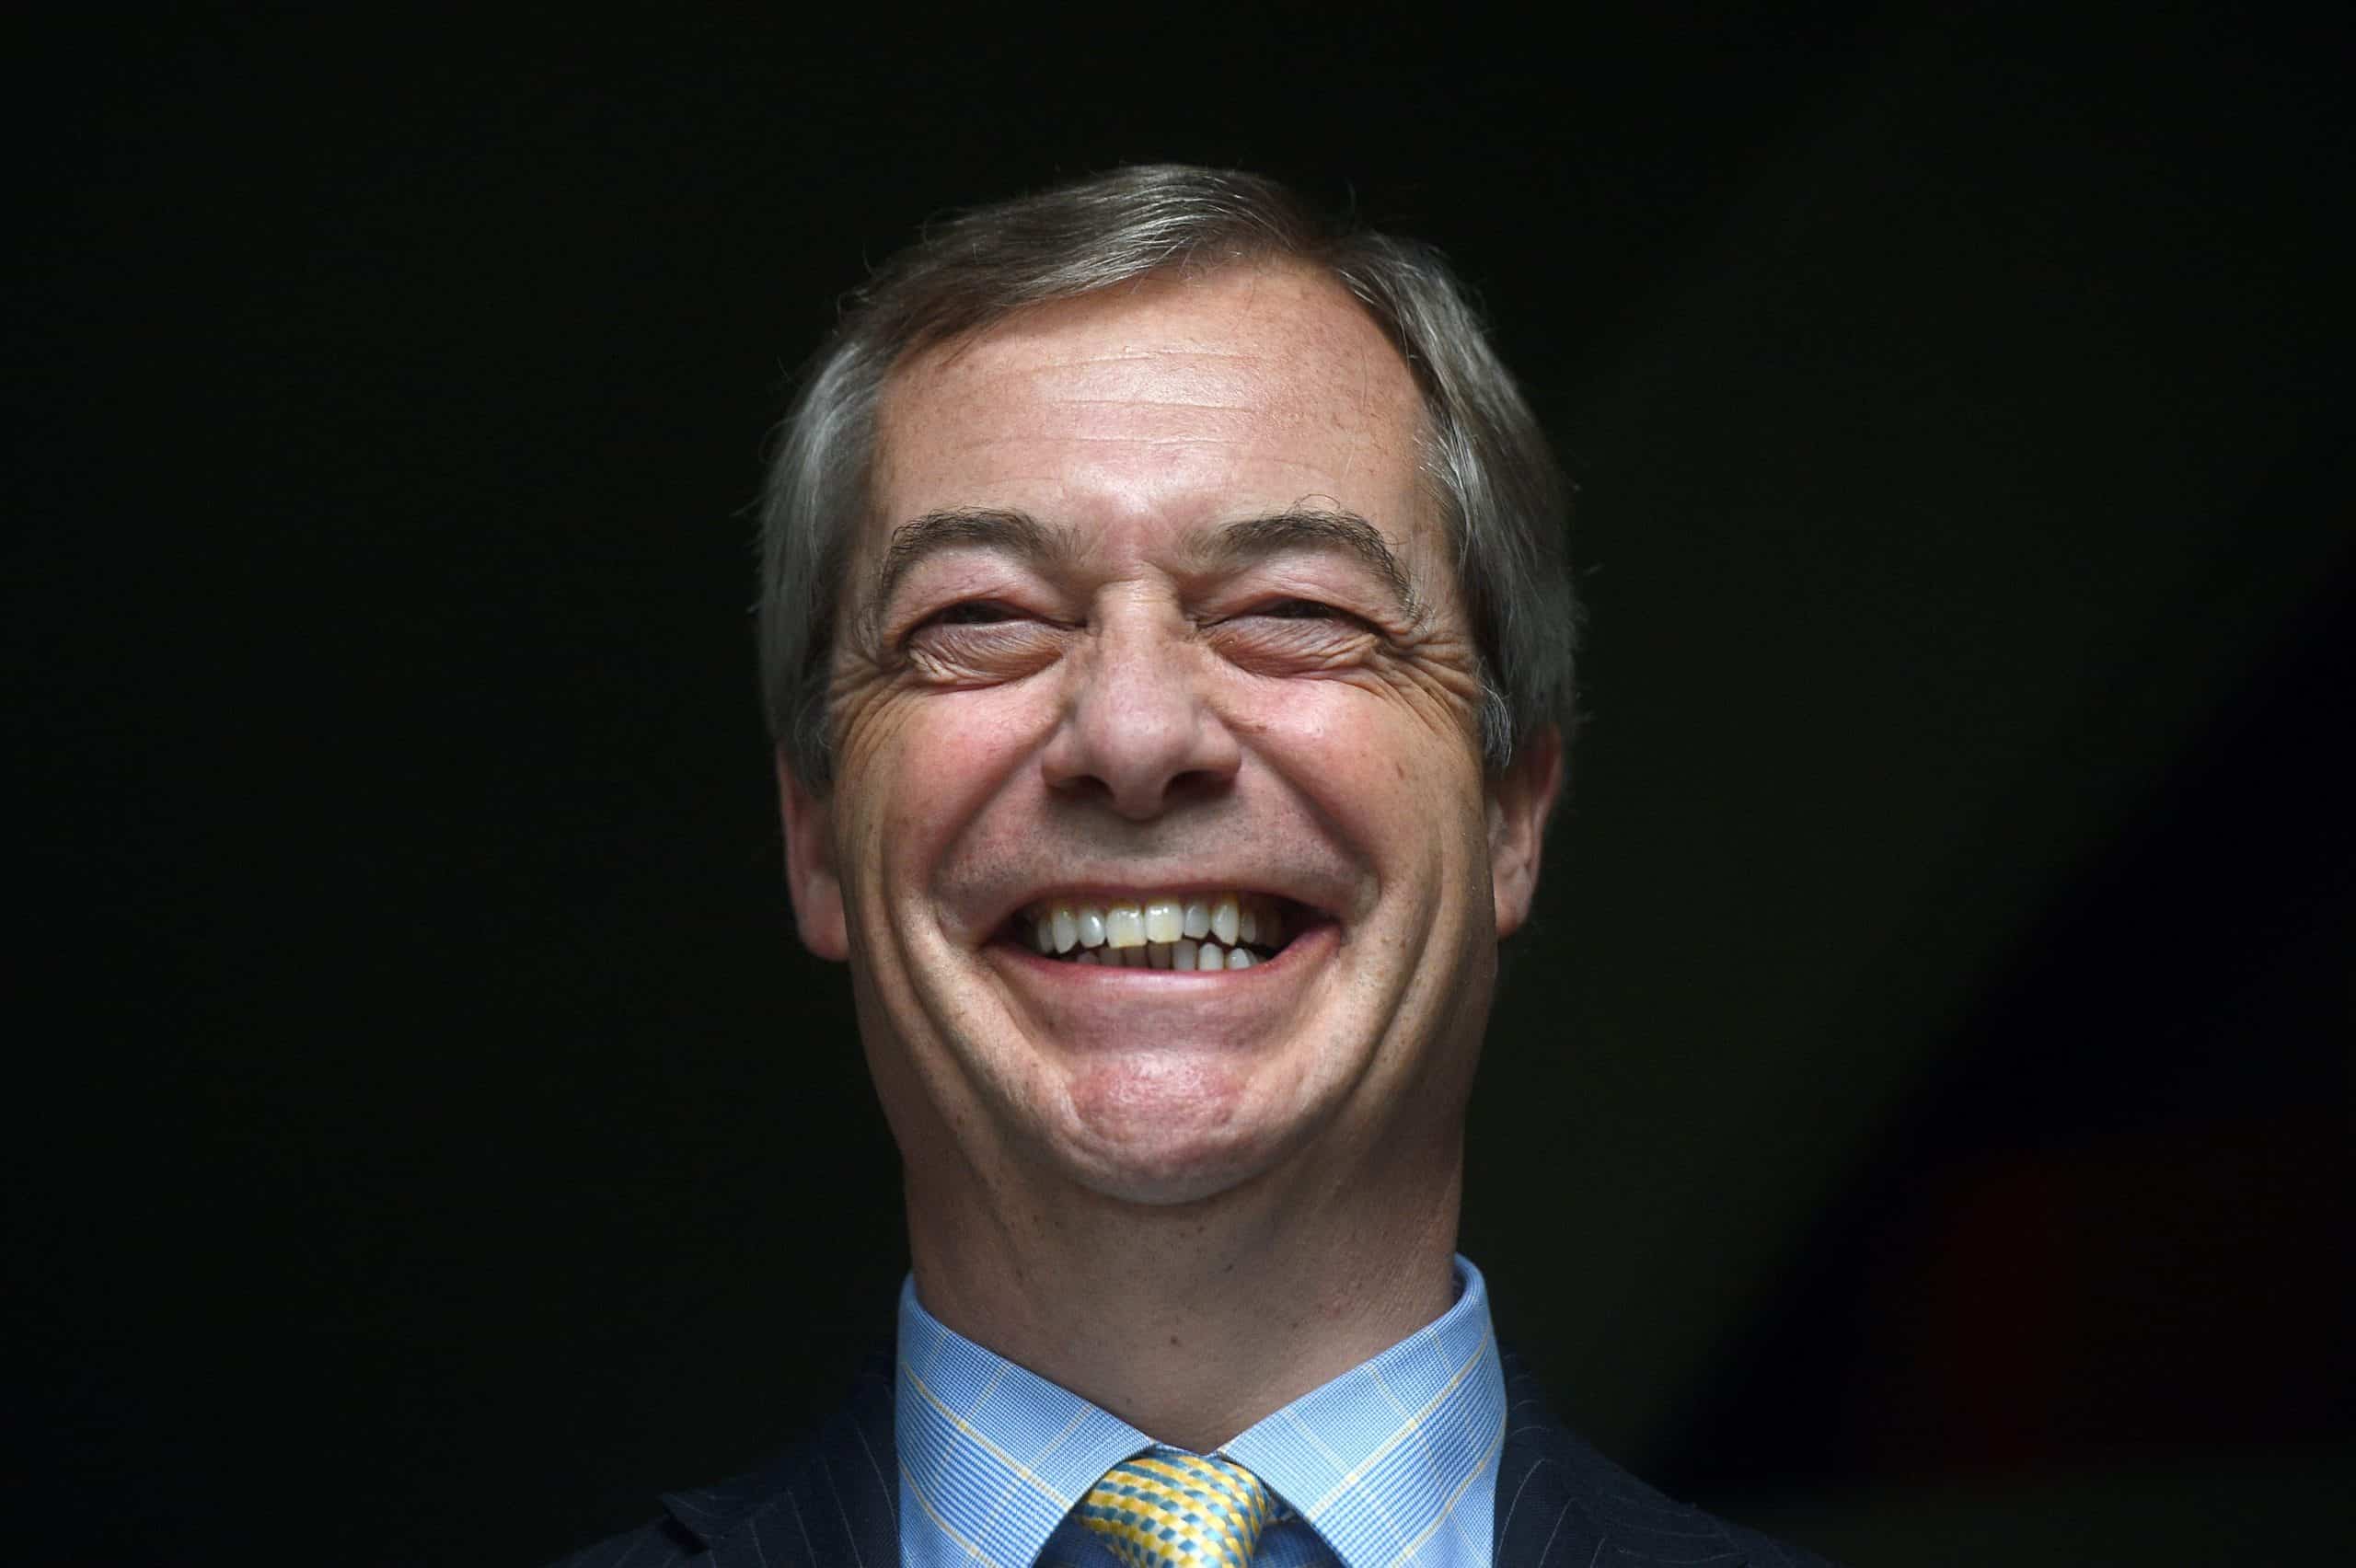 Nigel Farage’s latest grift? A newsletter telling you how to ‘take back control of your money’